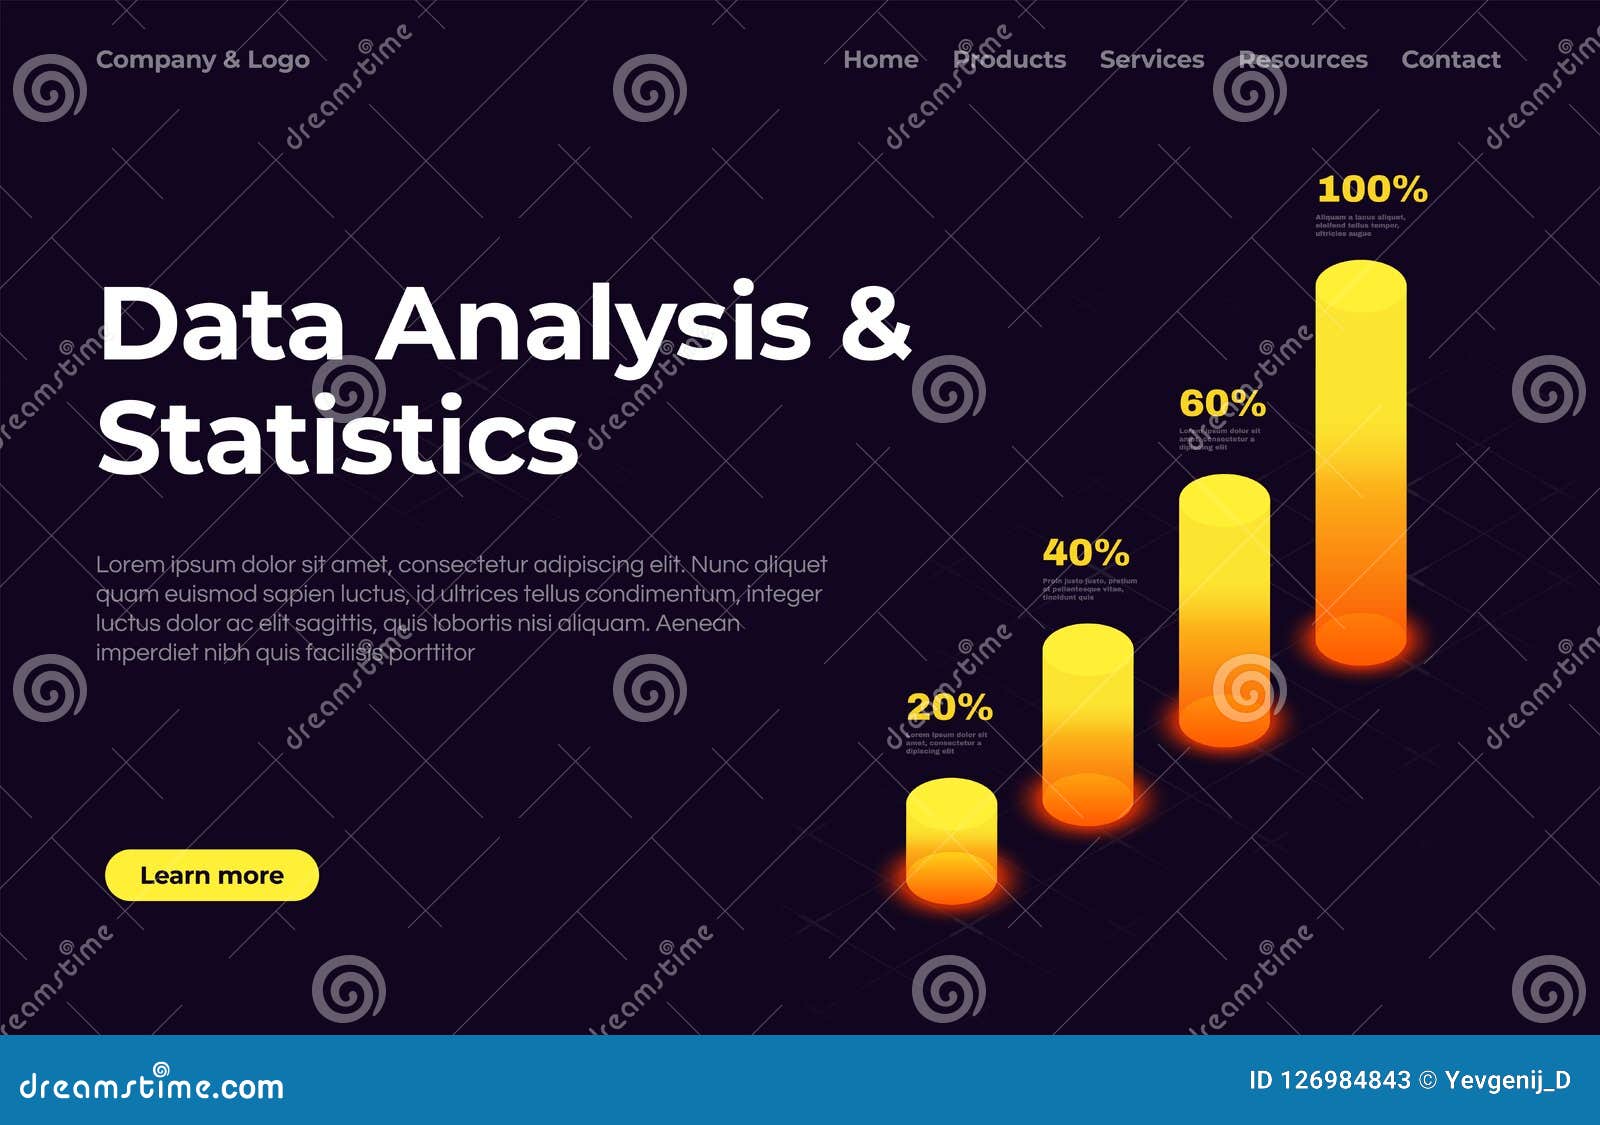 Data Analysis And Statistics Landing Page Template With Isometric